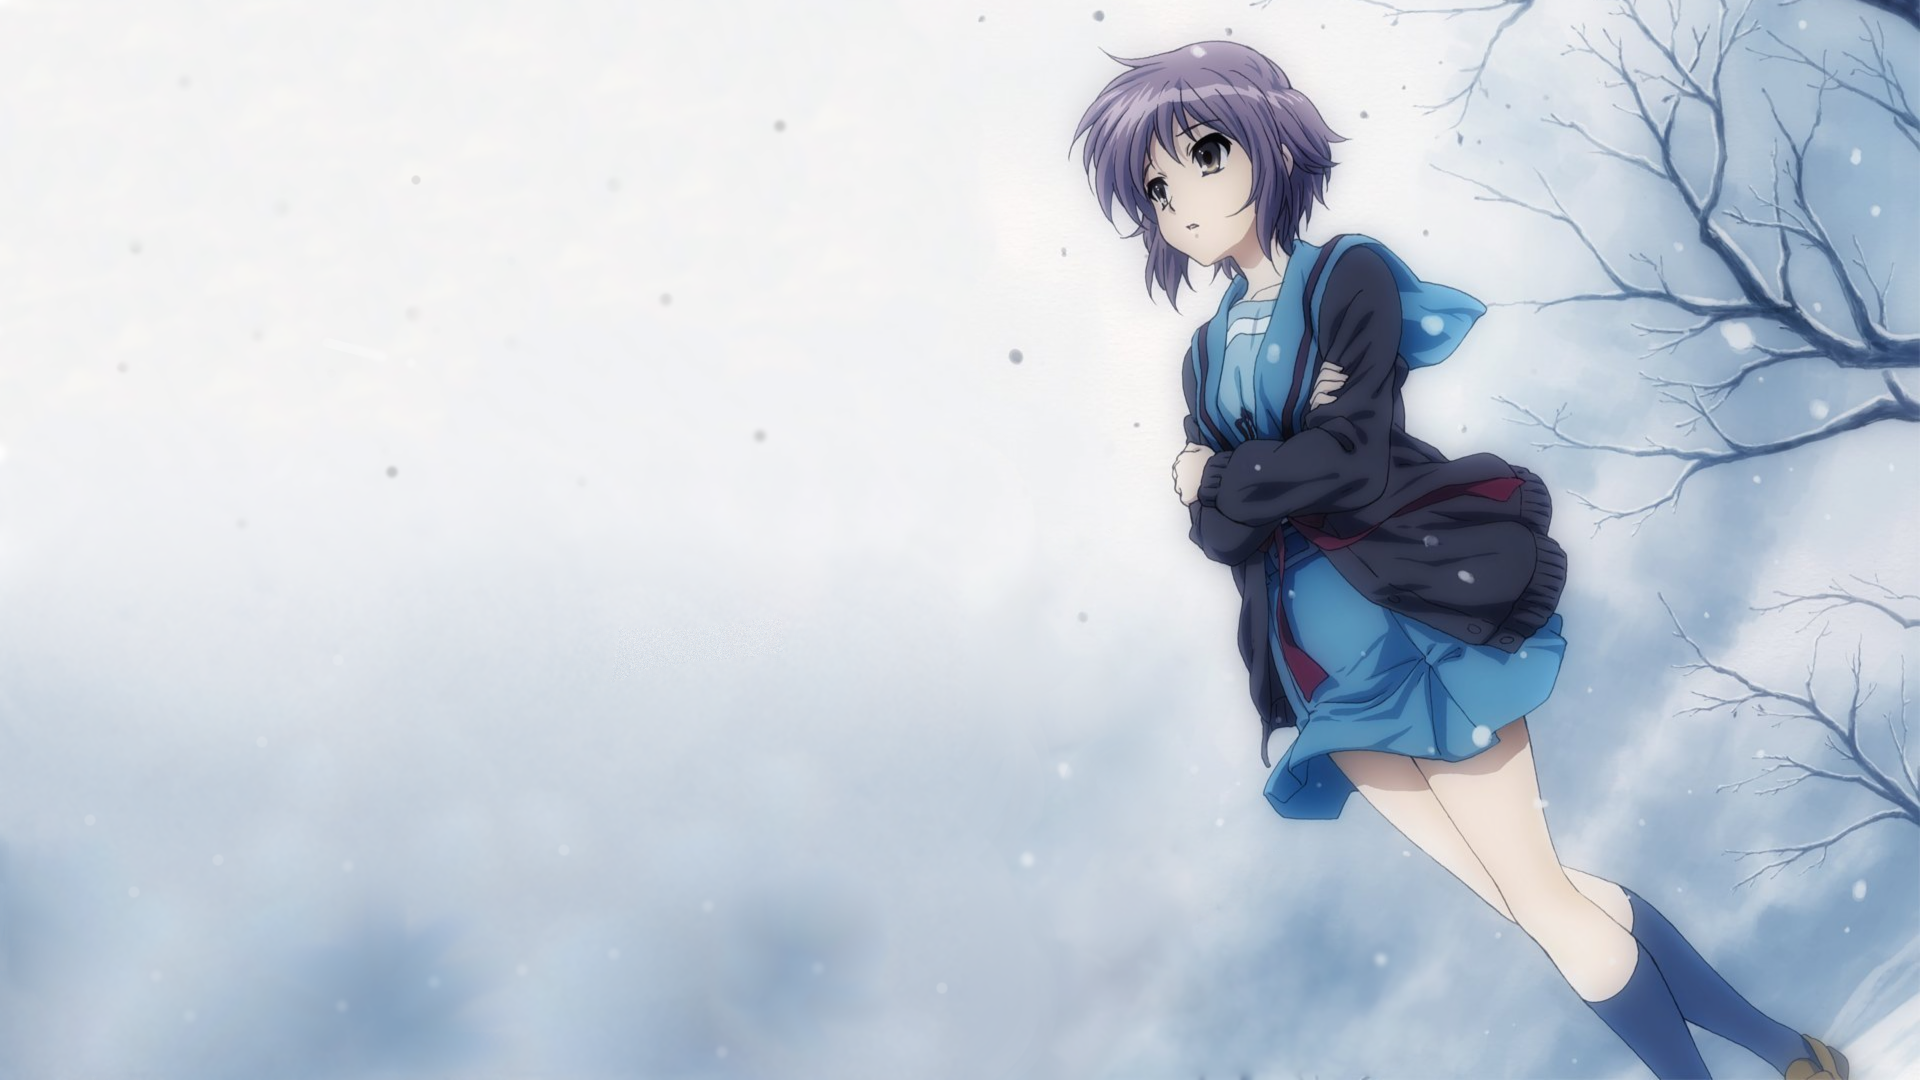 Anime Girls Wallpapers HD Pictures One HD Wallpaper Pictures